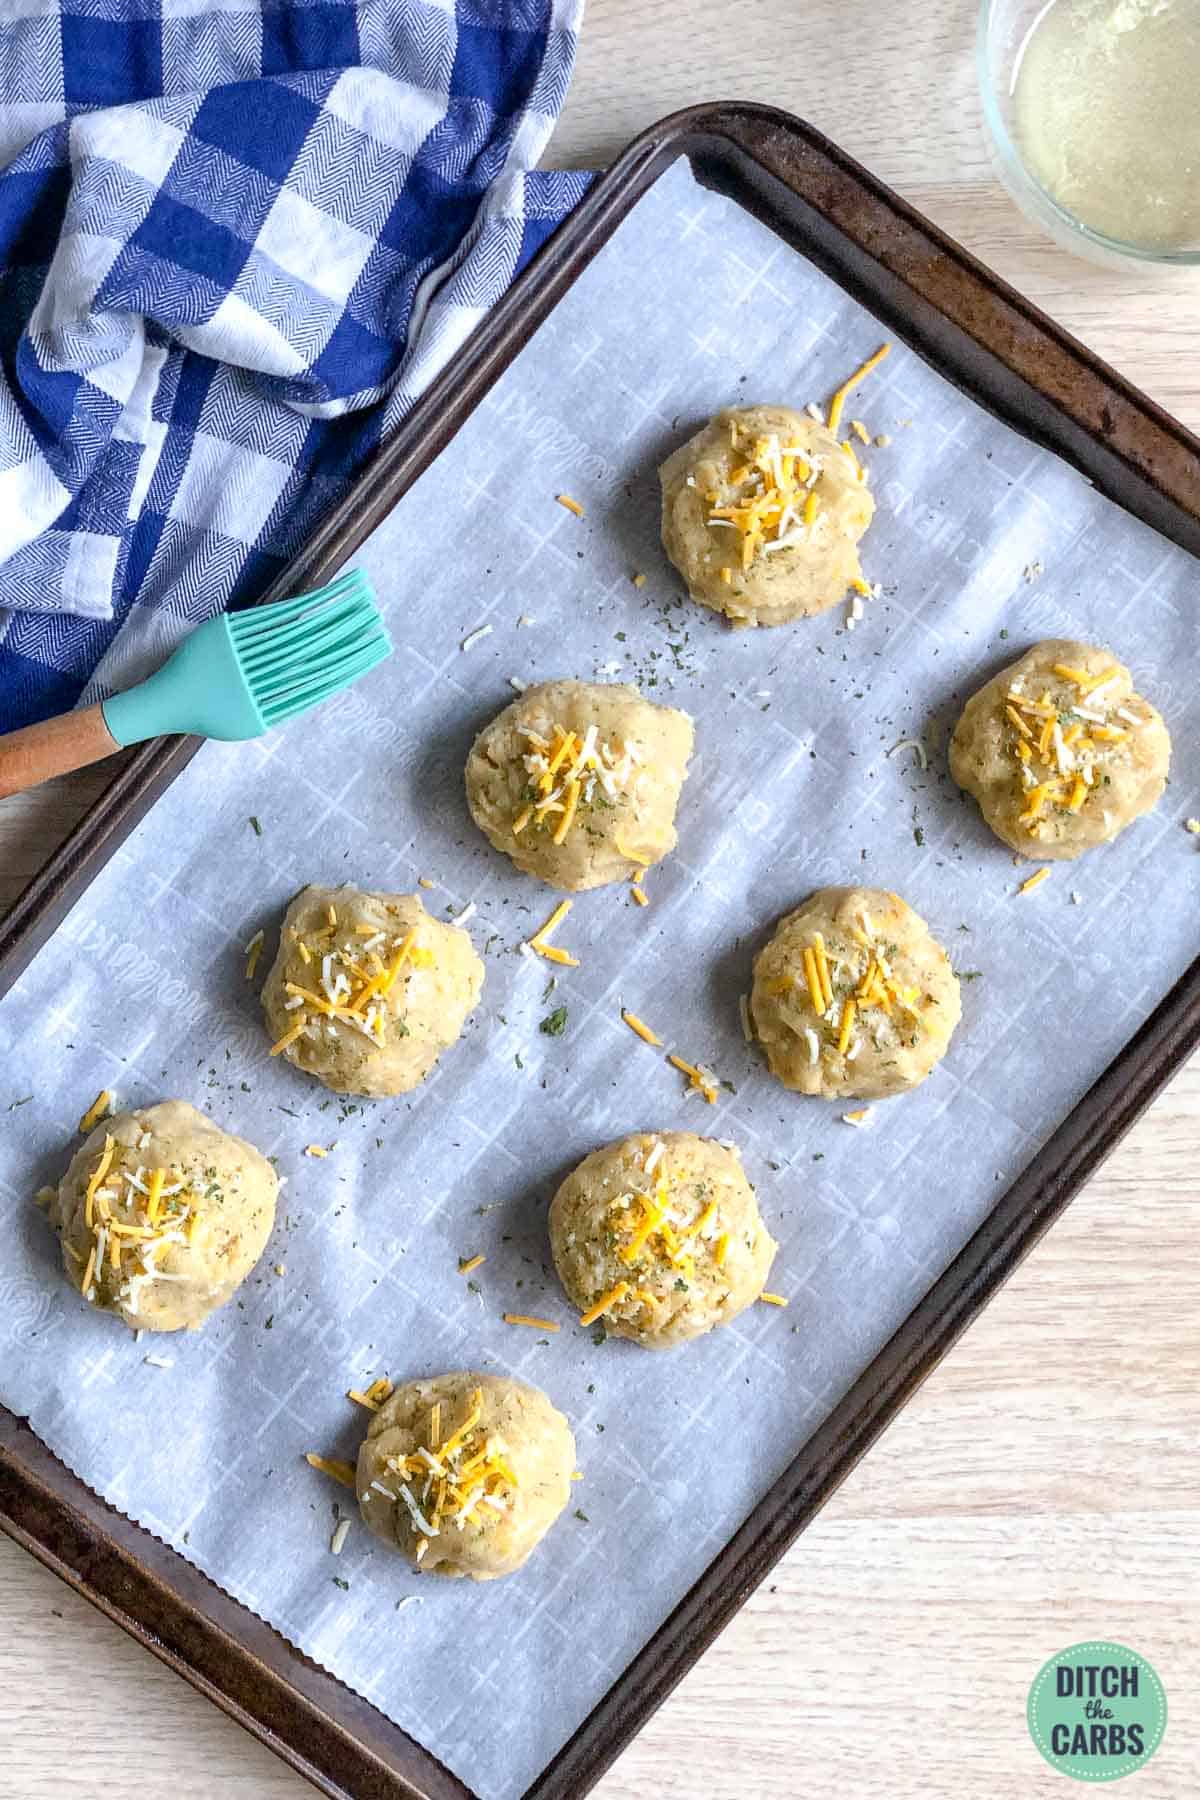 Keto cheddar biscuit(scone) dough has been arrange into 8 mounts on a lined baking pan. They have been brushed with melted butter and sprinkled with shredded cheese.